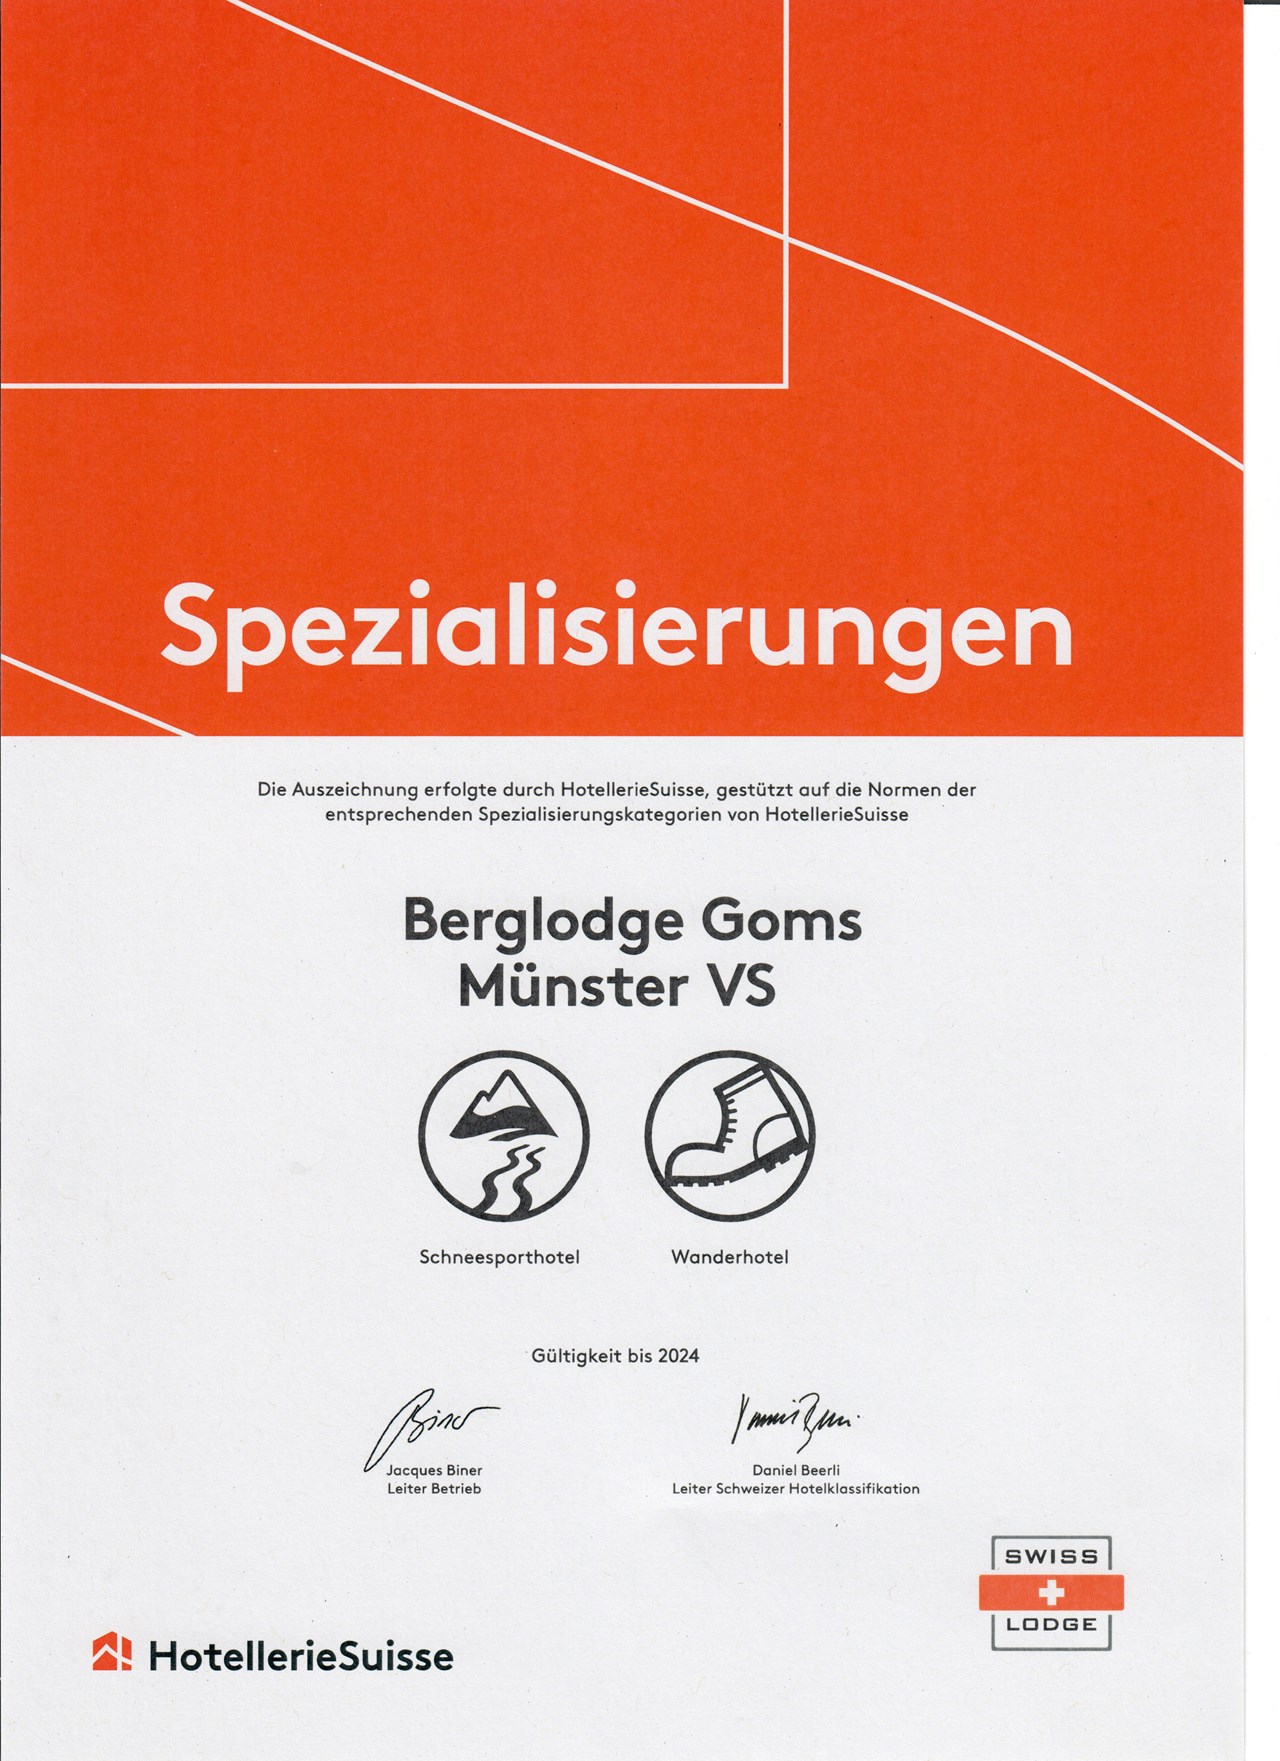 Berglodge Goms Evidence certificates Award for snow sports hotel and hiking hotel